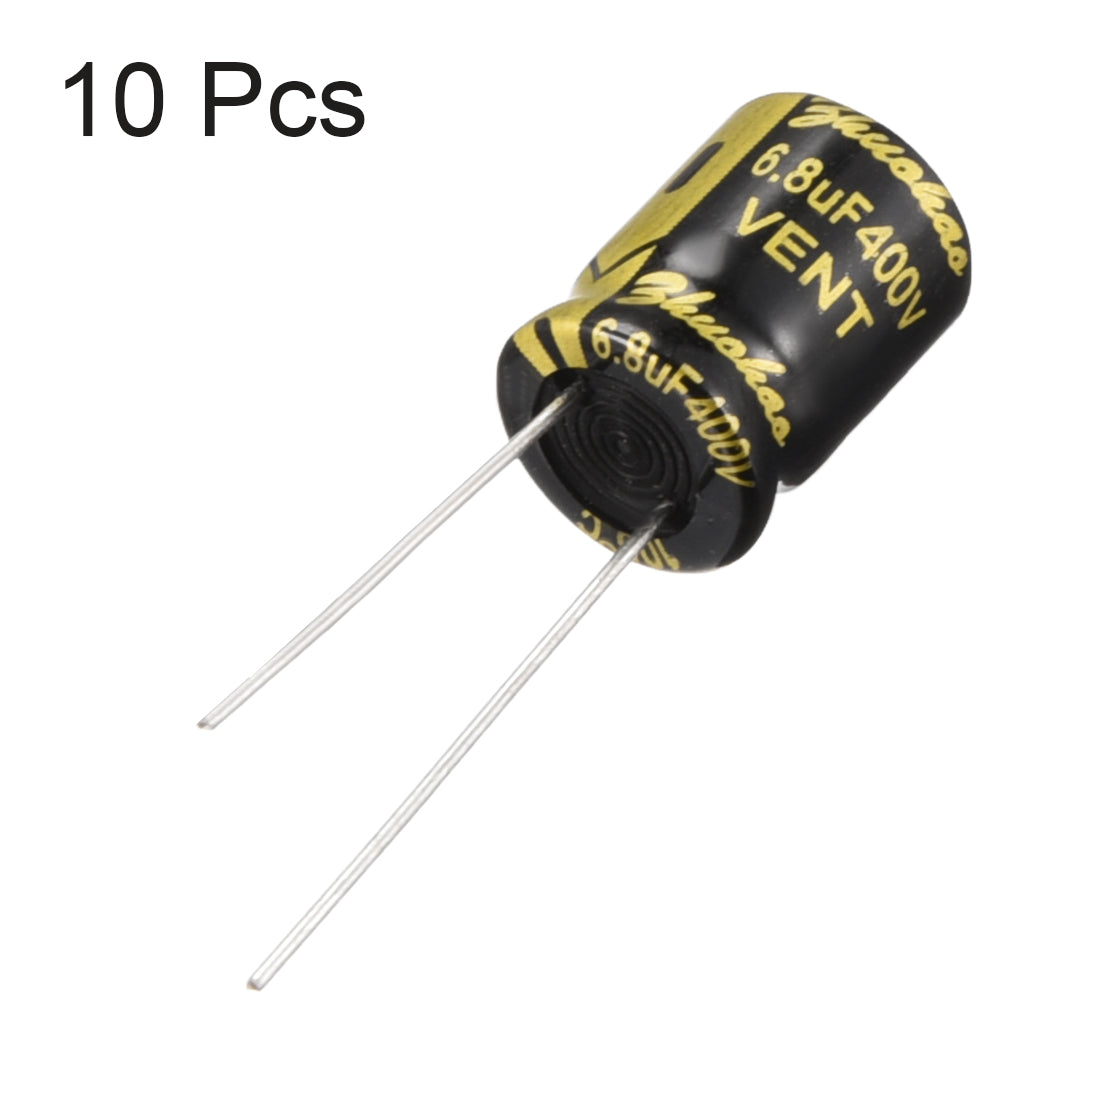 uxcell Uxcell Aluminum Radial Electrolytic Capacitor with 6.8uF 400V 105 Celsius Life 2000H 10 x 13 mm Black 10pcs